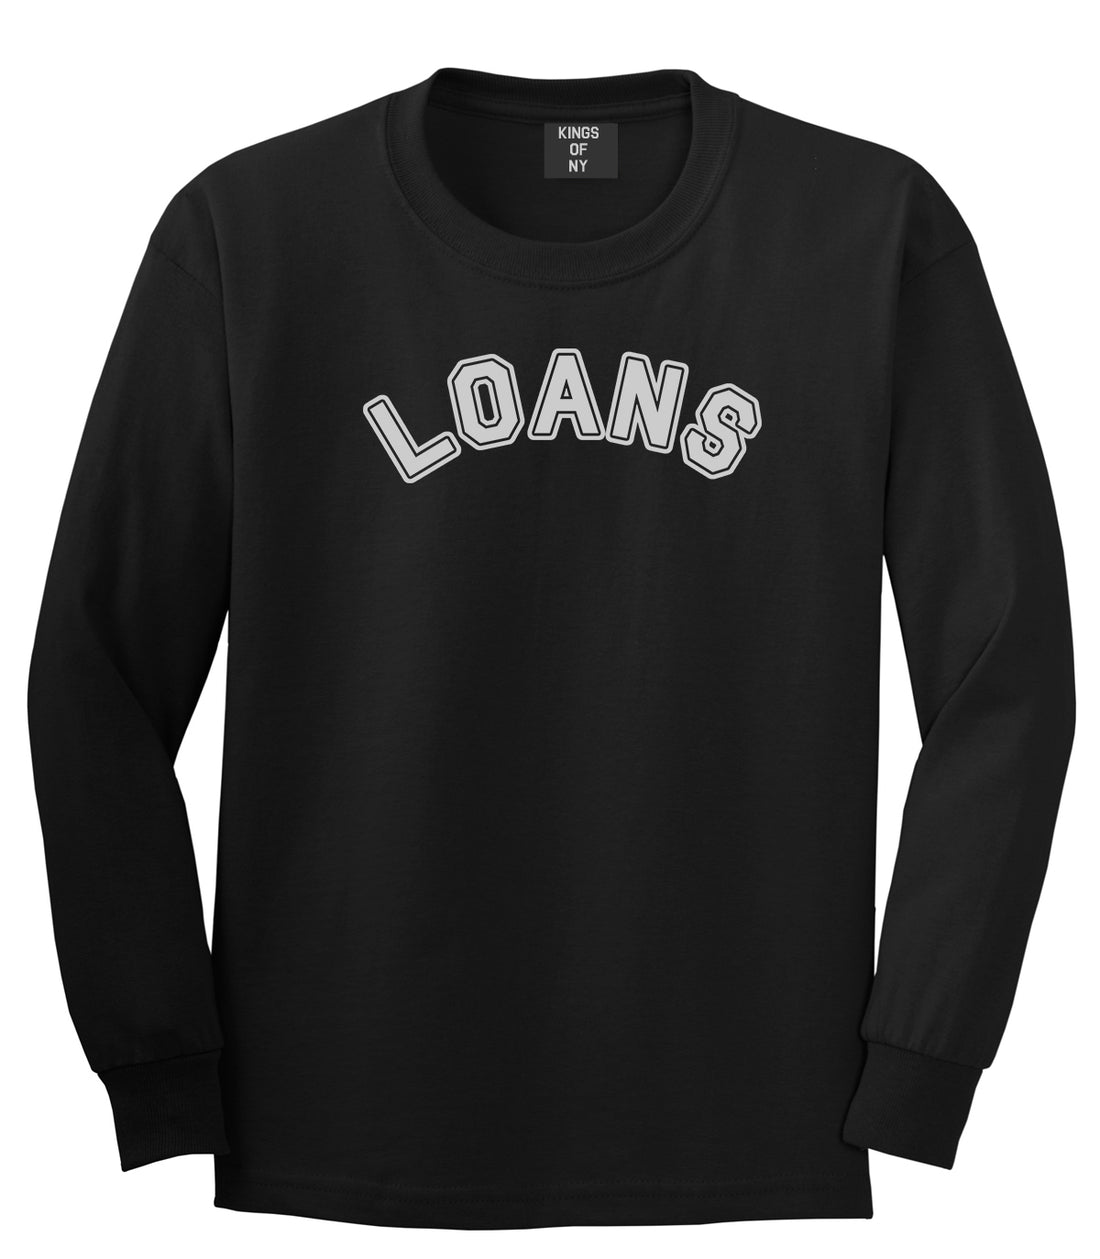 Student Loans College Long Sleeve T-Shirt in Black